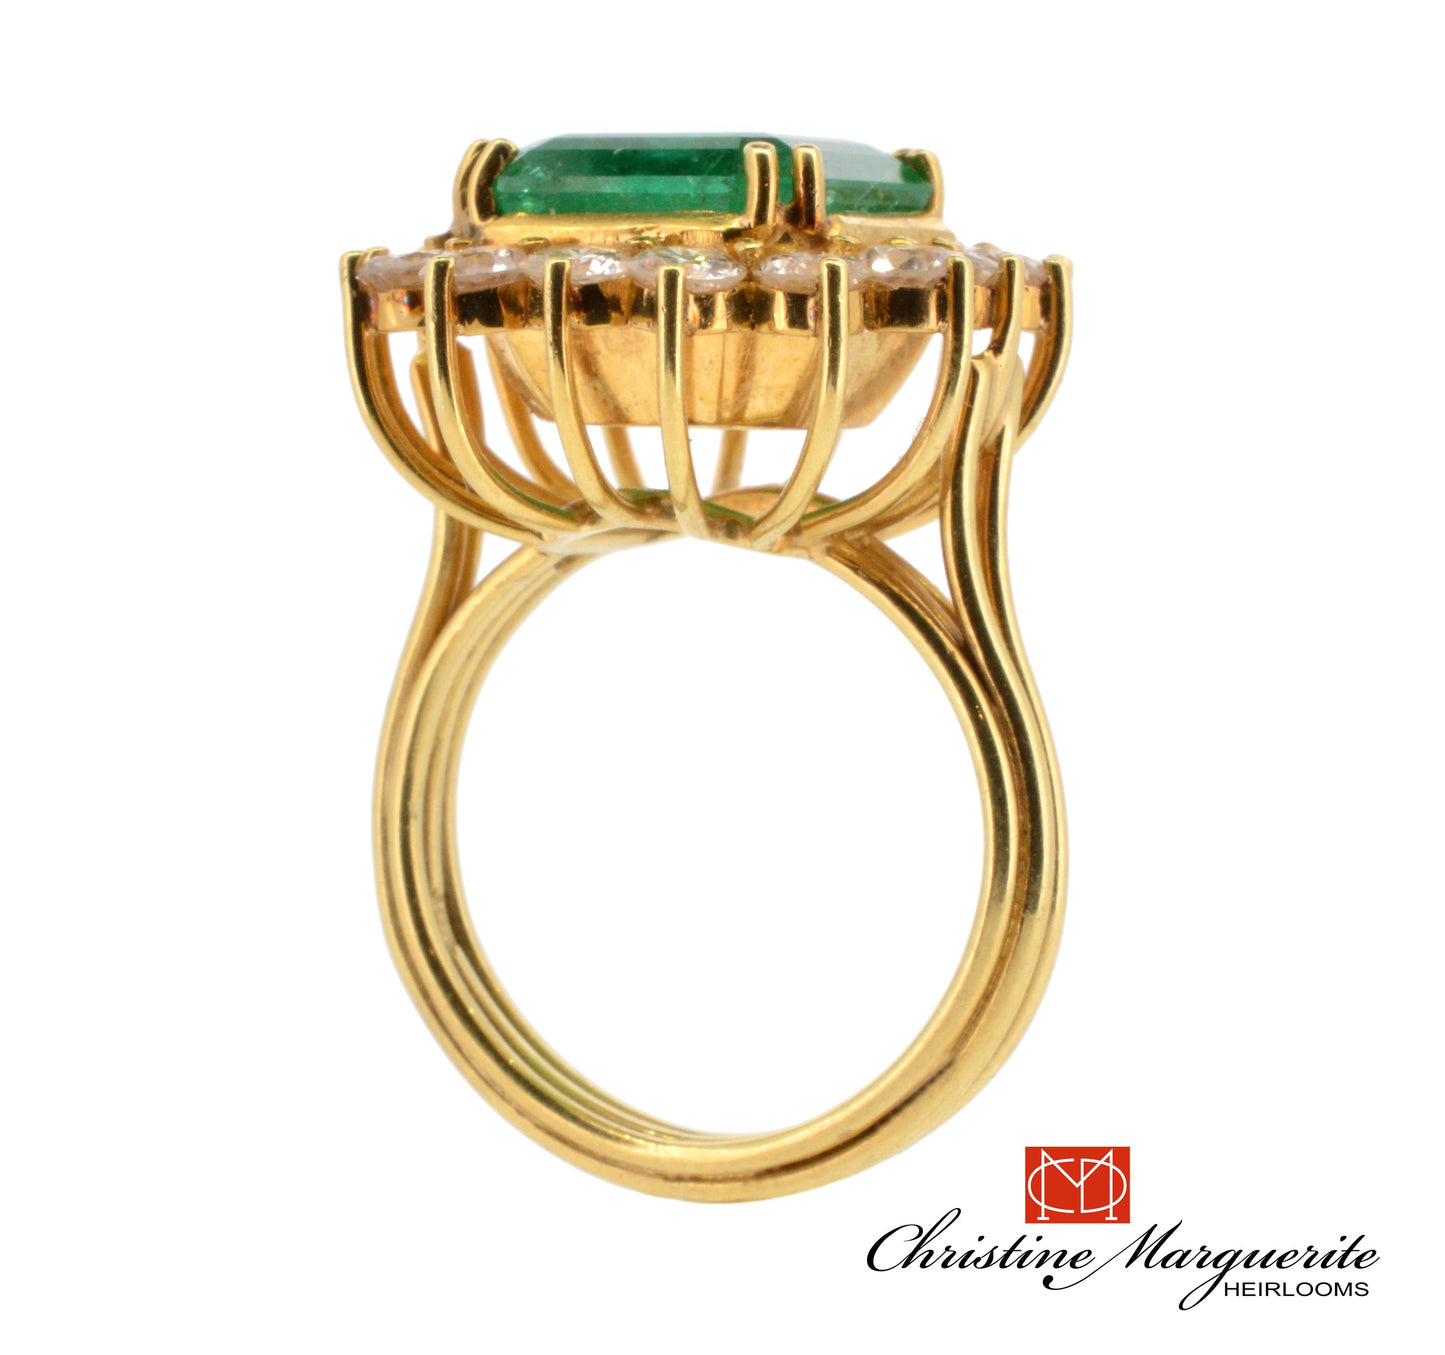 HE=Colombian emerald ring with diamond accents in 18KY gold 5,5carats